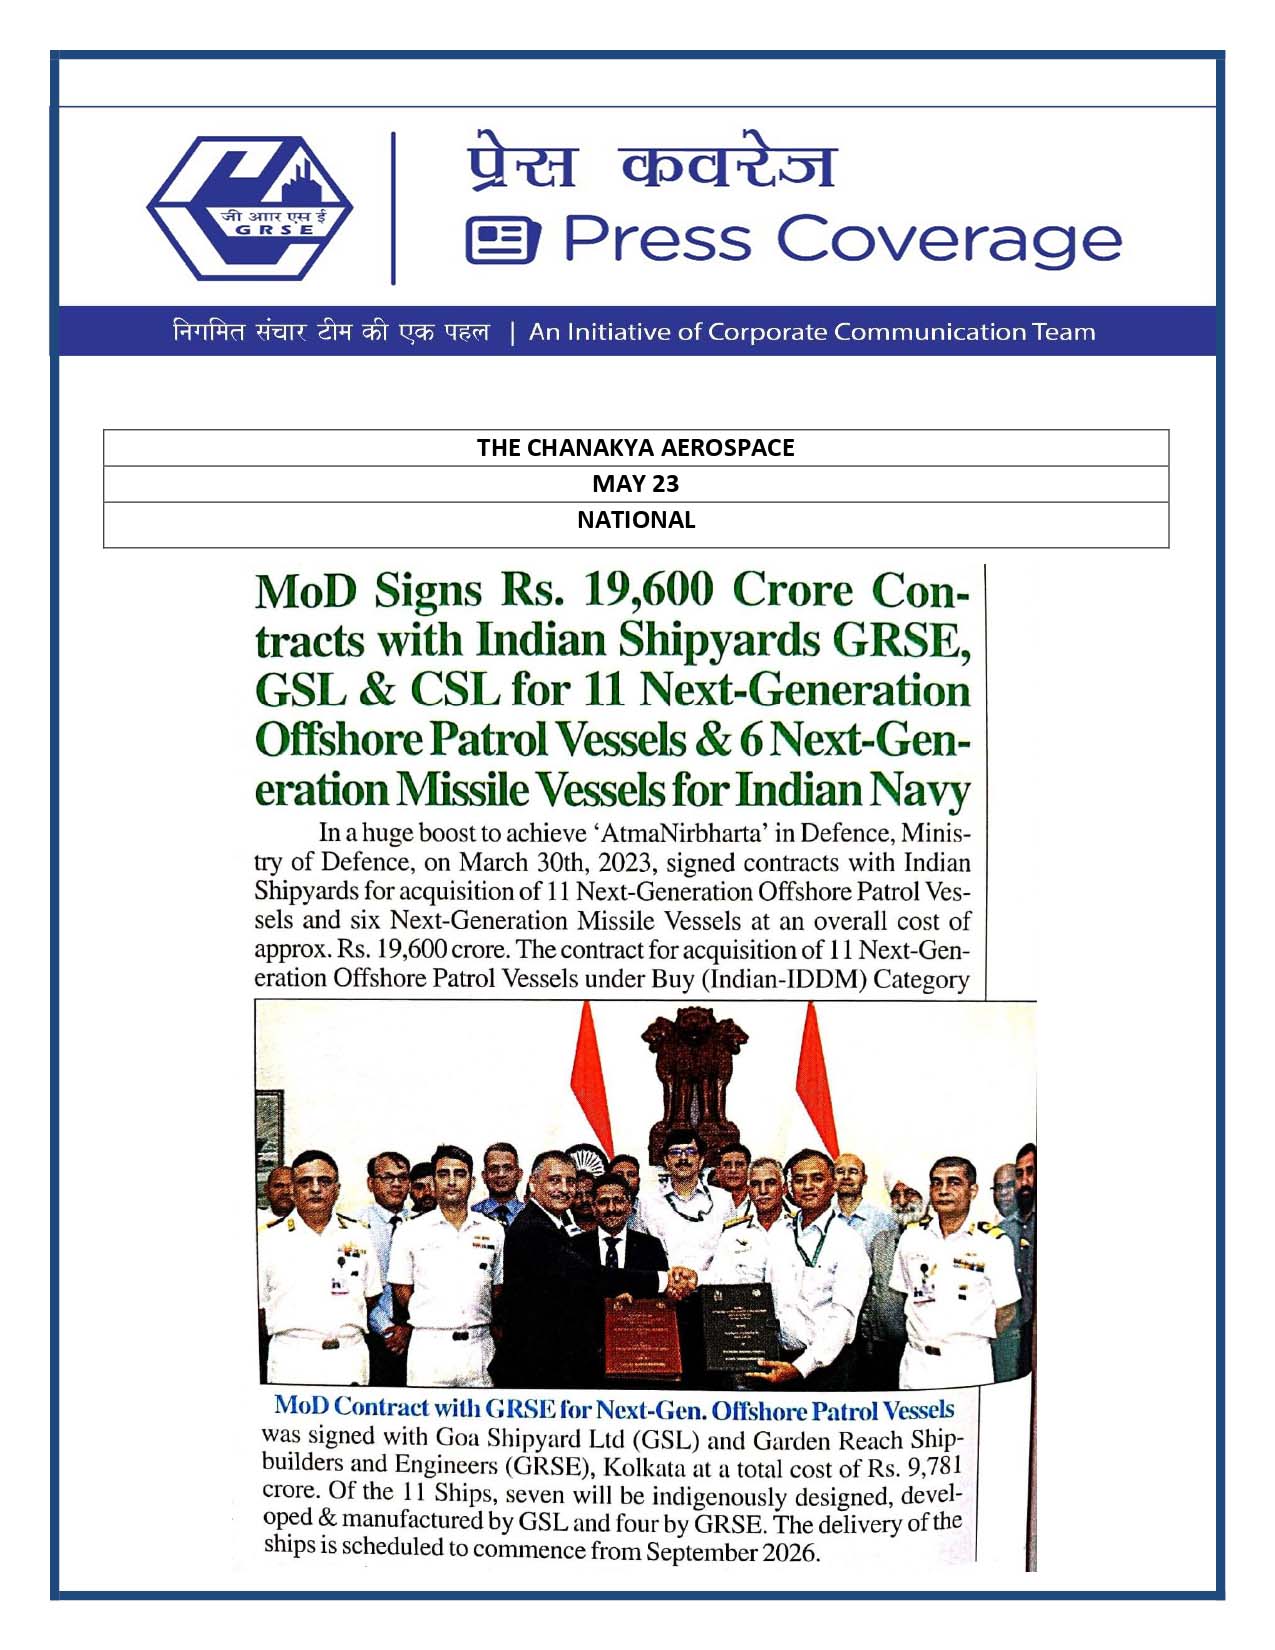 MoD signs Rs. 19,600 Crore Contracts with Indian Shipyards GRSE, GSL & CSL for 11 Next-Generation Offshore Patrol Vessel & 6 Next-Generation Missile Vessels for Indian Navy